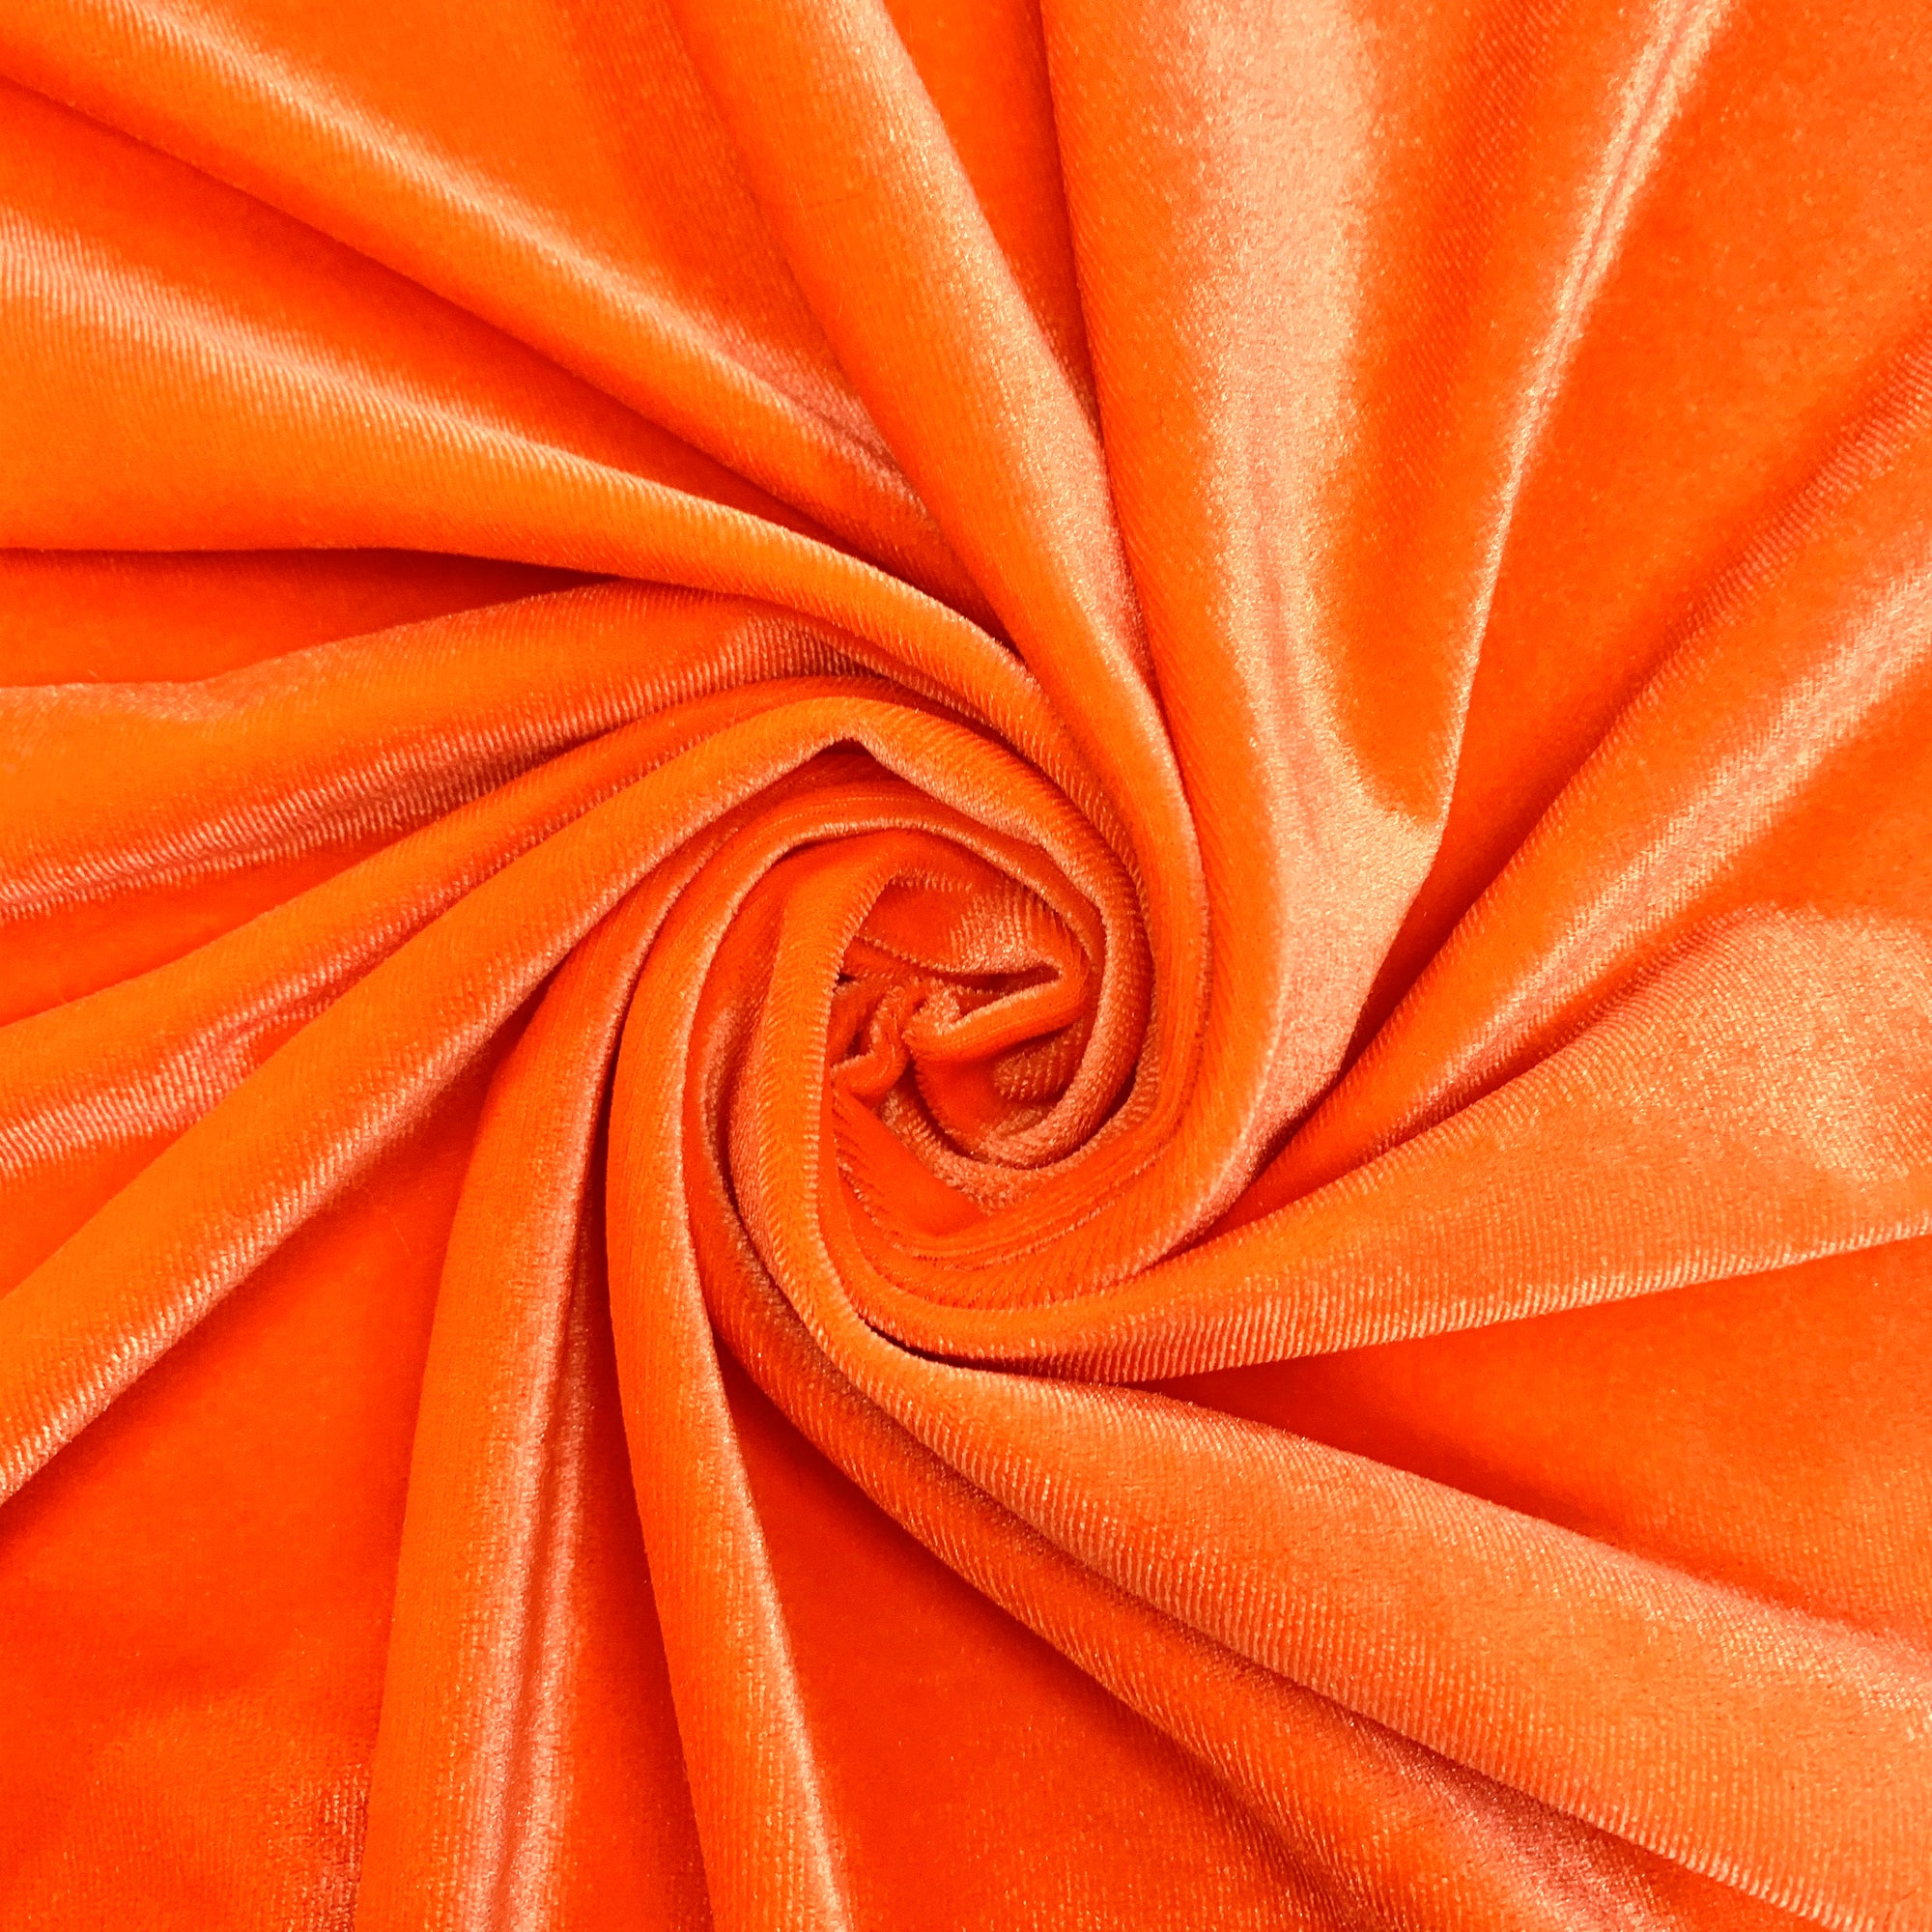 Princess BRIGHT ORANGE Polyester Stretch Velvet Fabric for Bows, Top Knots, Head Wraps, Scrunchies, Clothes, Costumes, Crafts